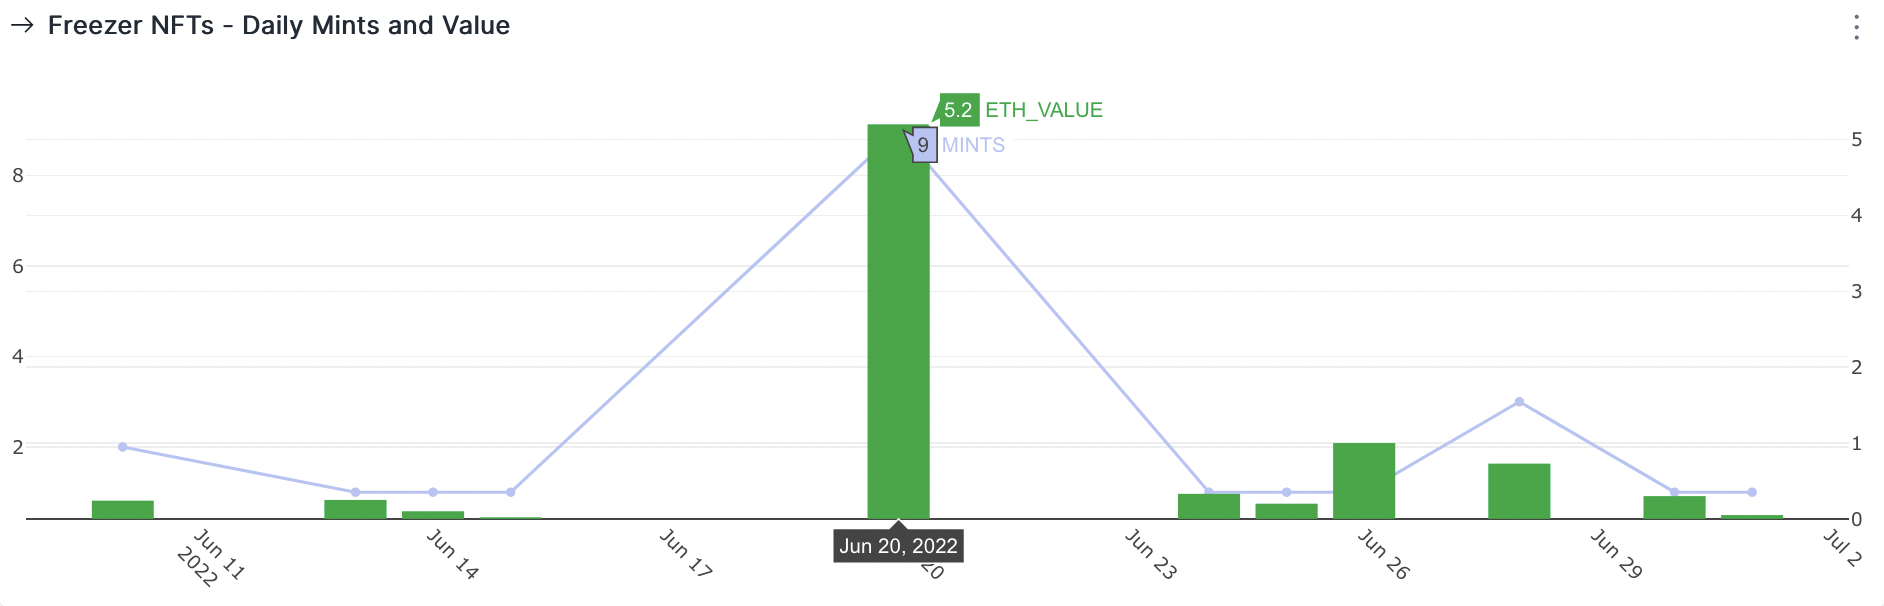 Daily NFT Mints and ETH Value